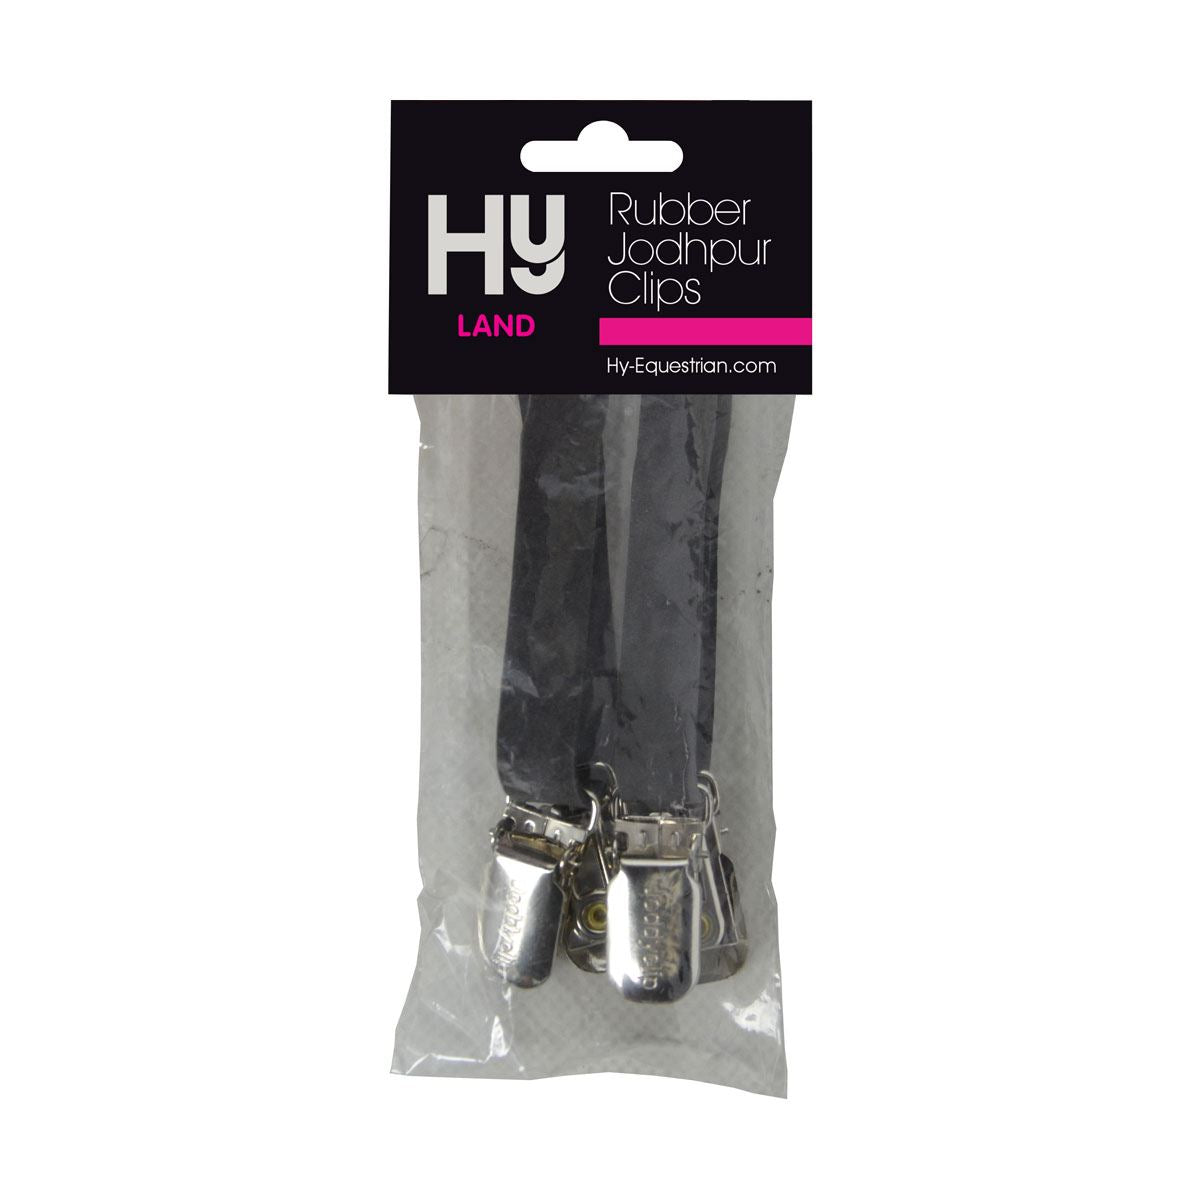 Hy Equestrian Rubber Jodhpur Clips - Just Horse Riders